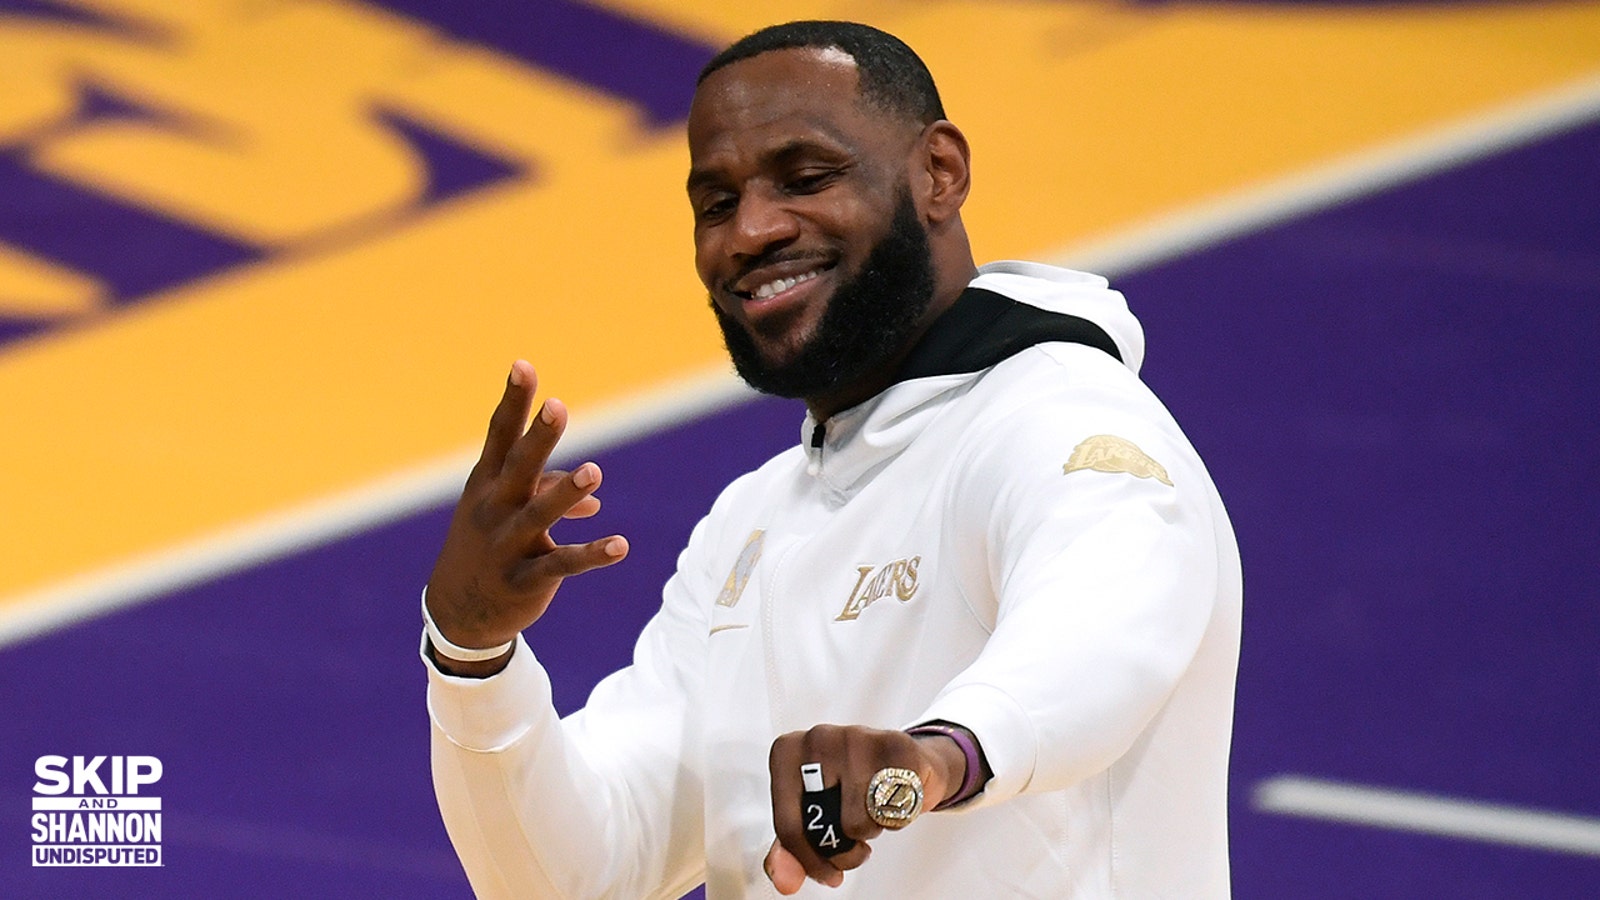 Will LeBron James, Lakers capture another NBA championship?